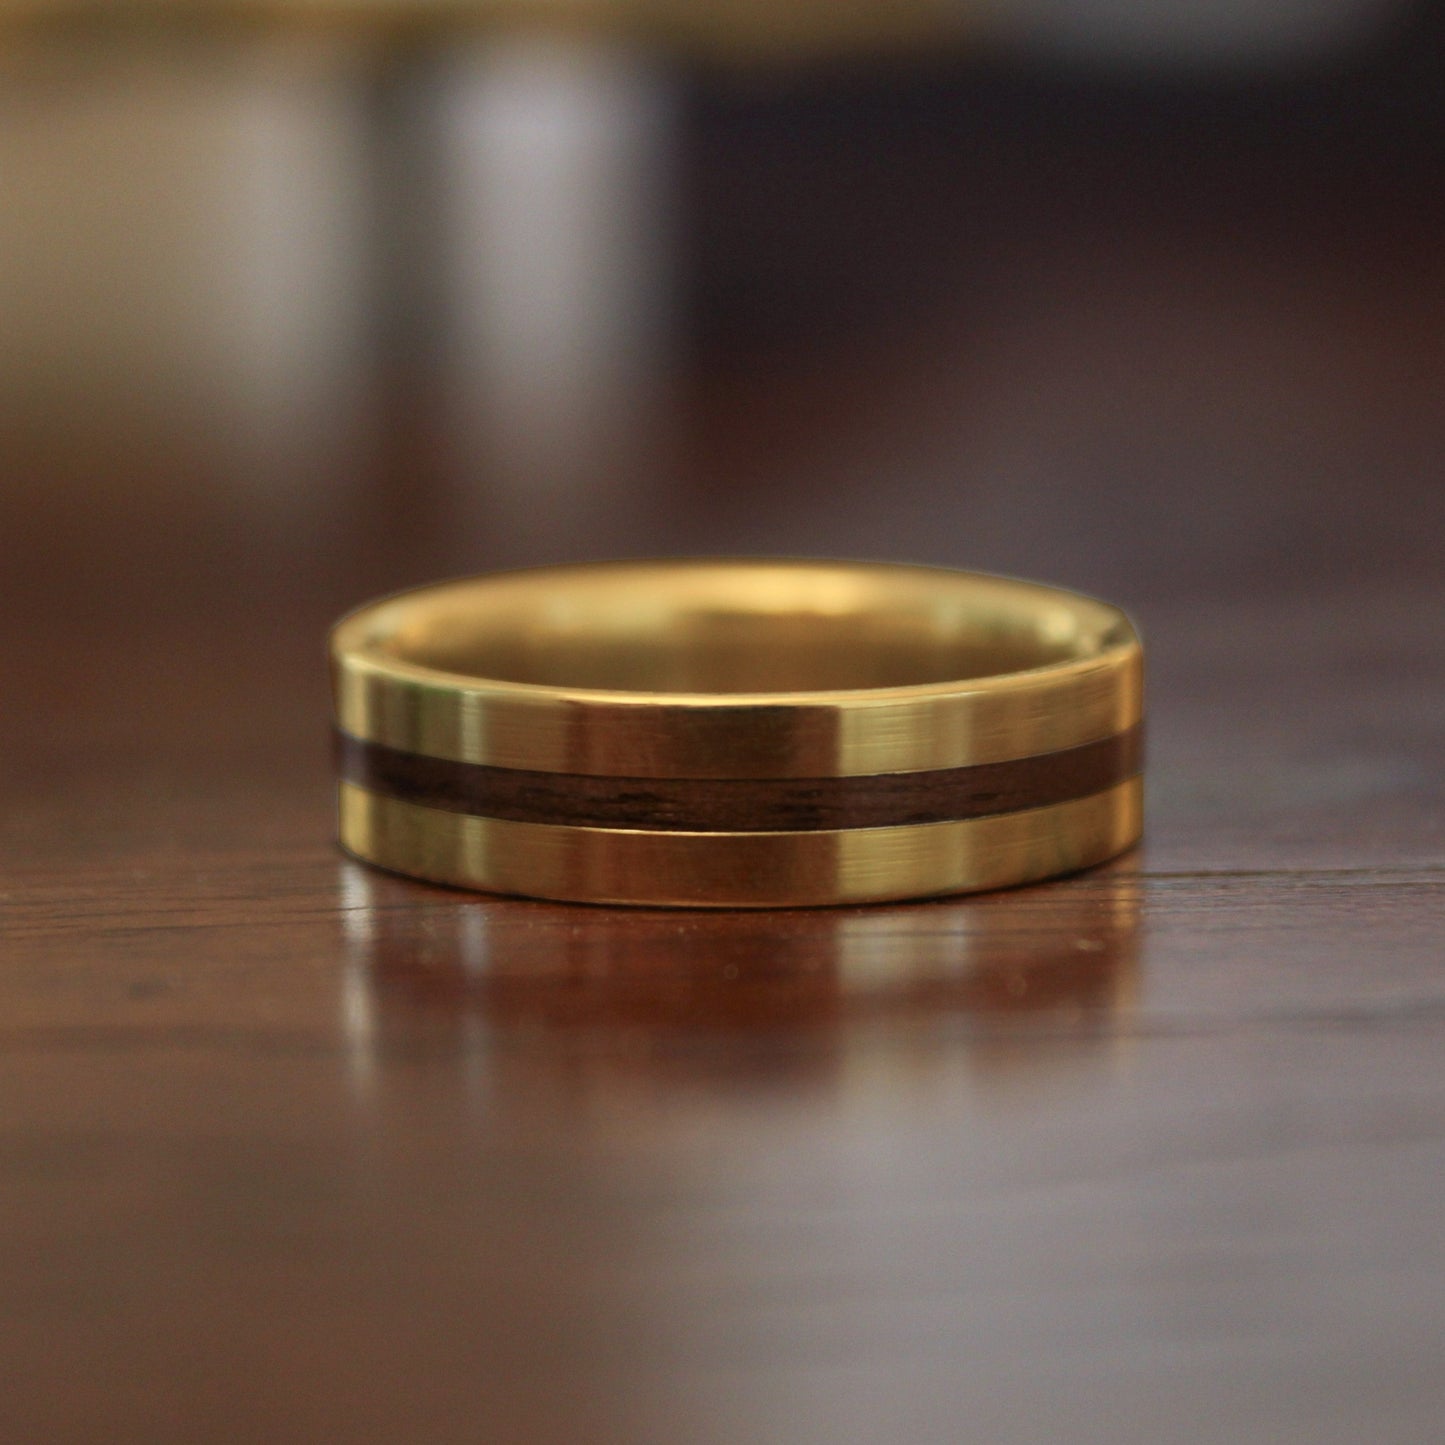 Gold ring with wood